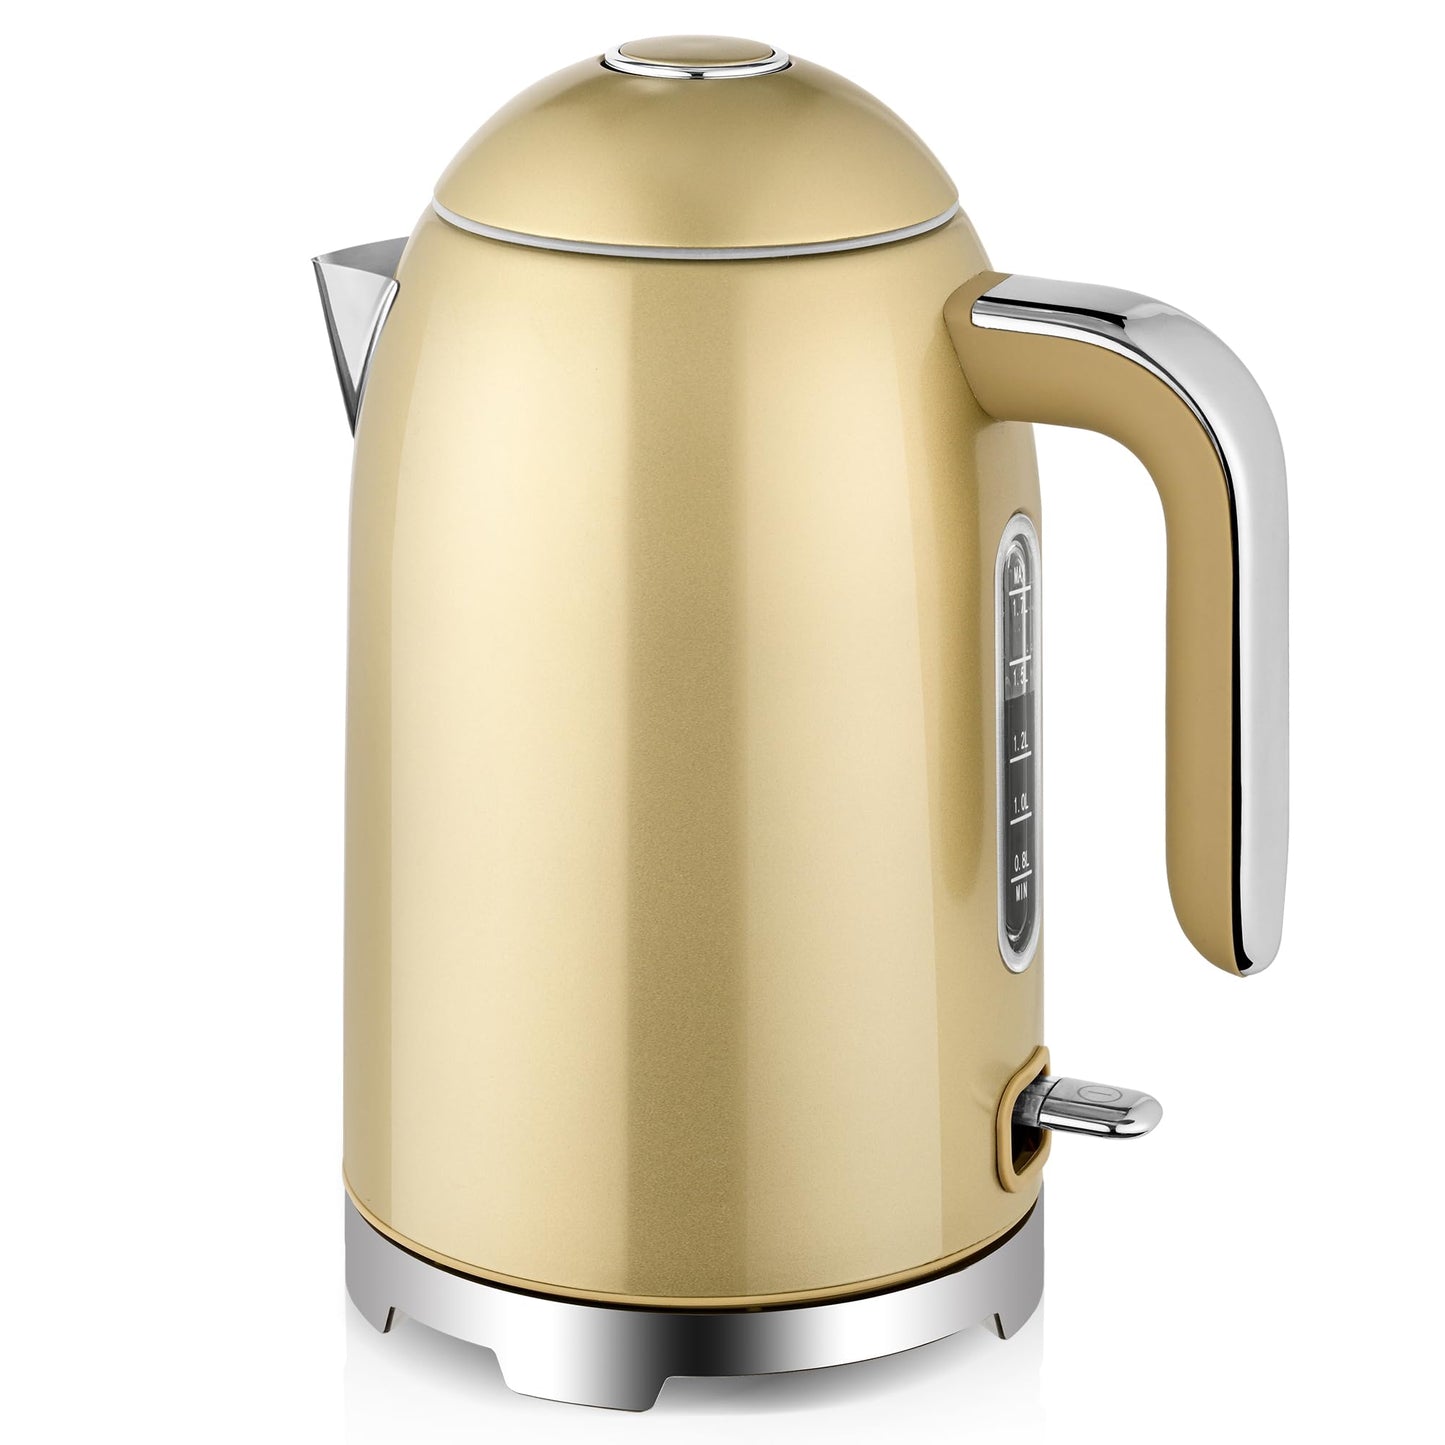 SUSTEAS 57OZ /1500W Fast Heating Stainless Steel Electric Hot Water Tea Kettle (Champagne)